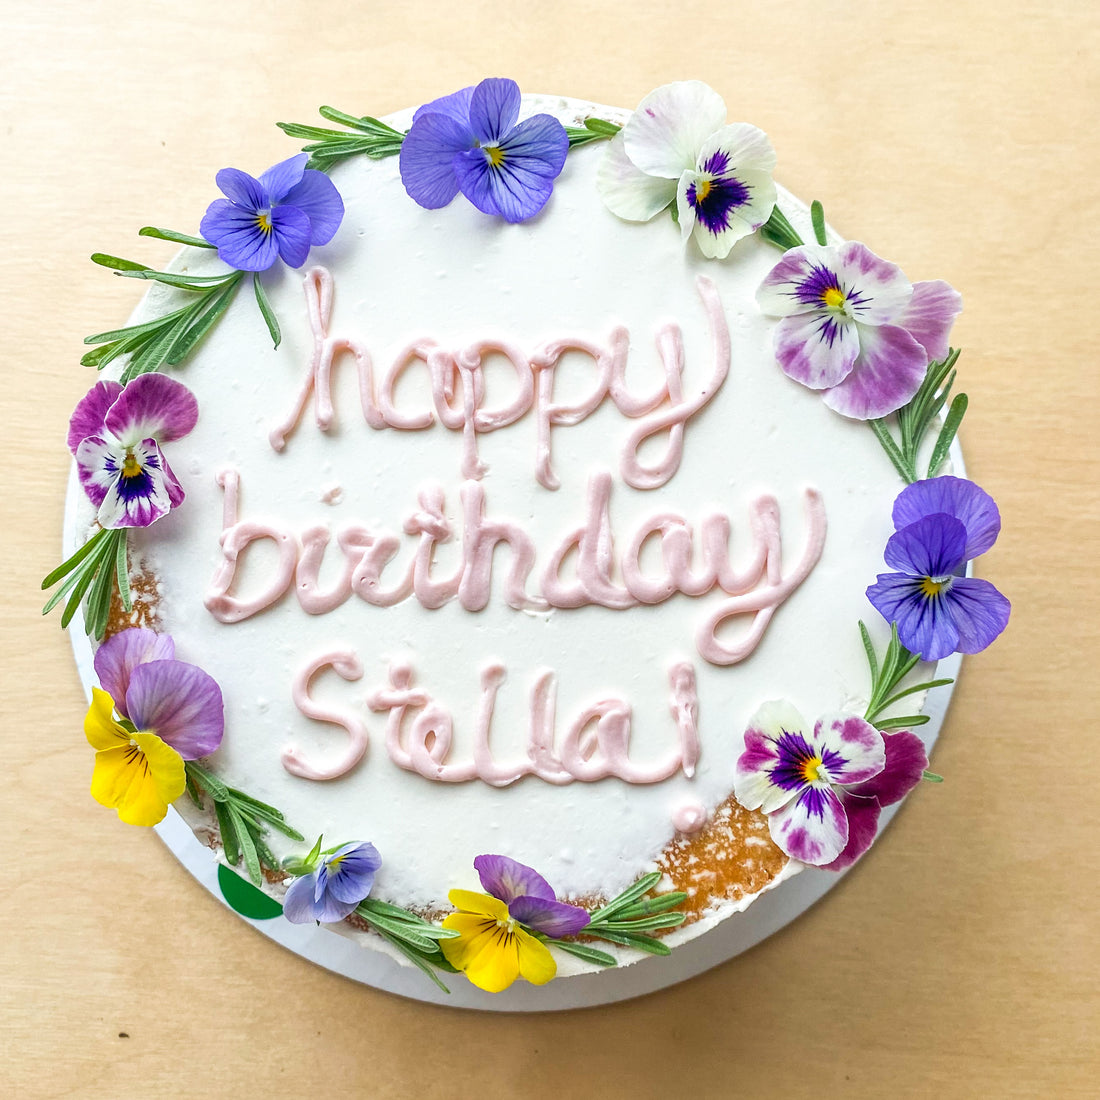 Stella Celebrated Its First Year In Style – My Magic Moments